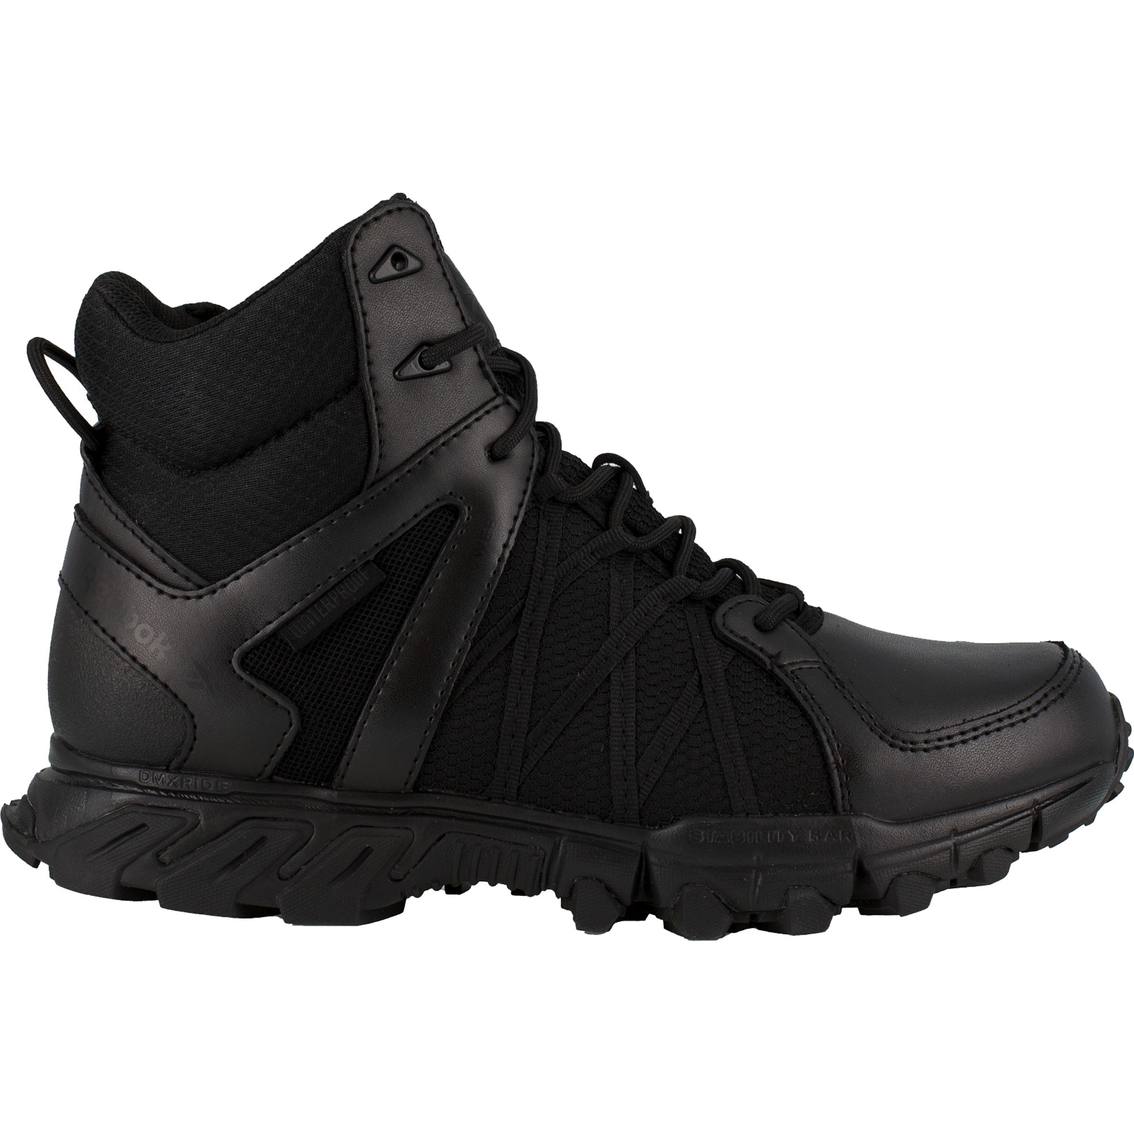 Reebok Trailgrip Tactical Boots - Image 2 of 5